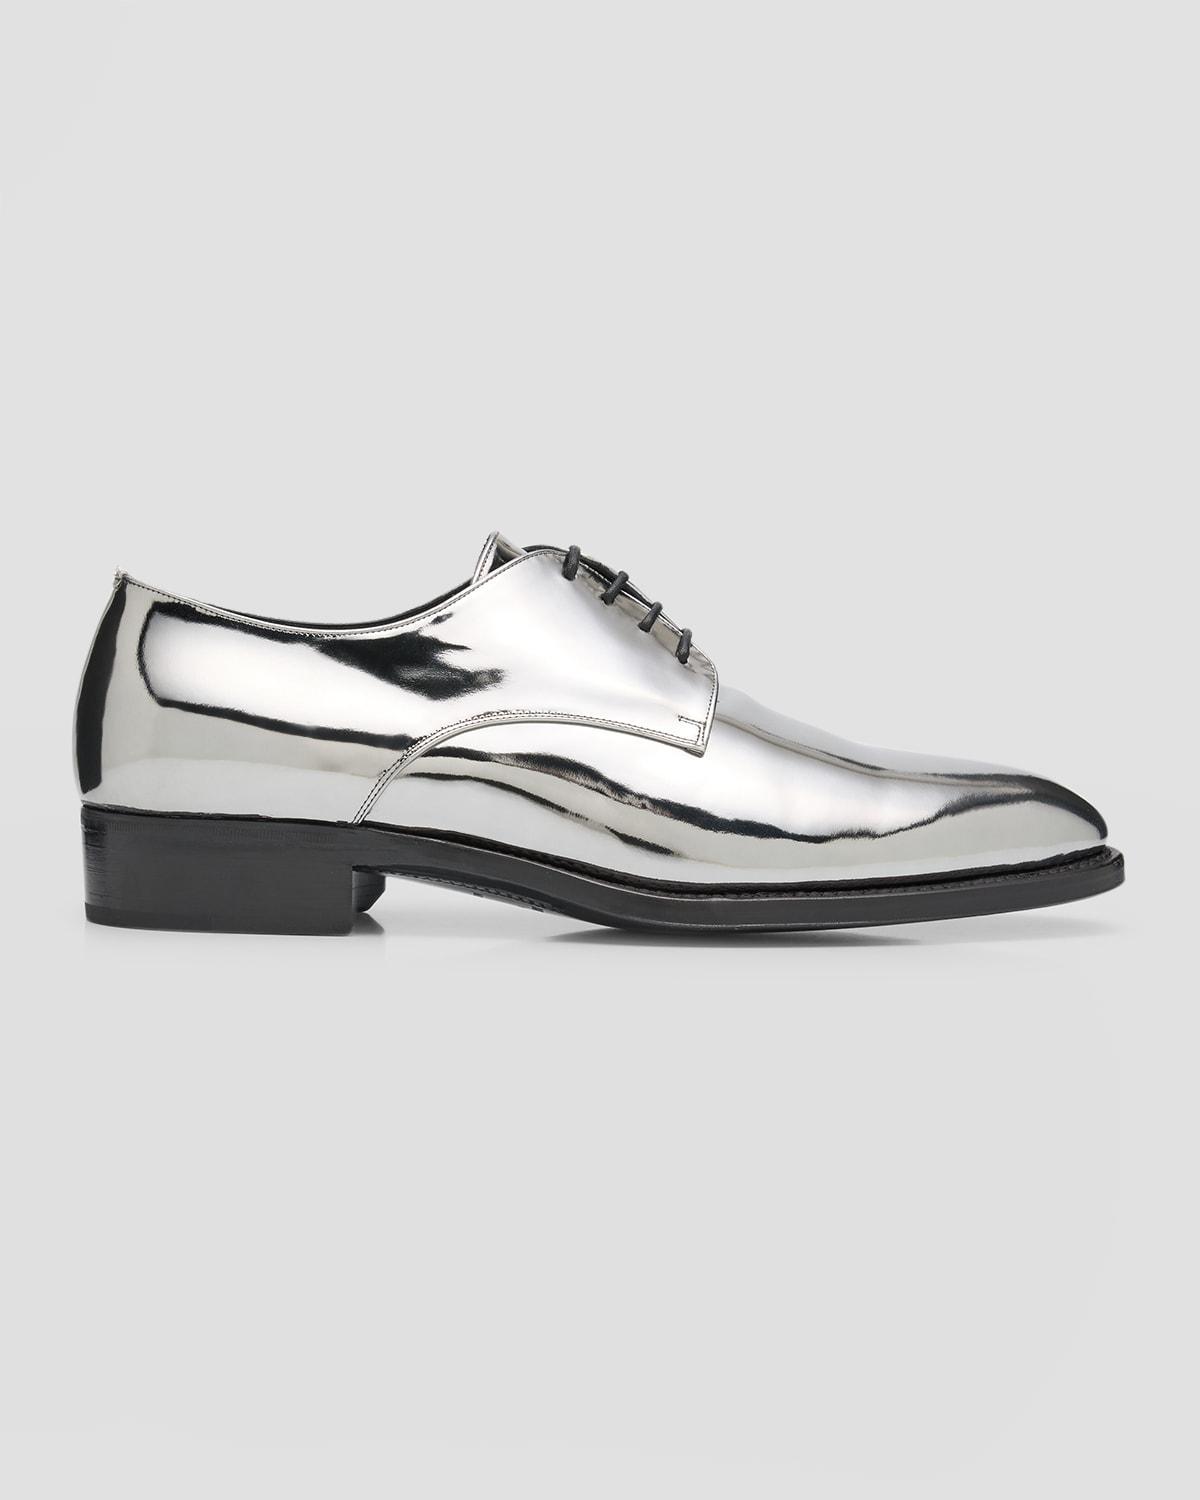 Mens Adrien 25 Metallic Leather Derby Shoes Product Image